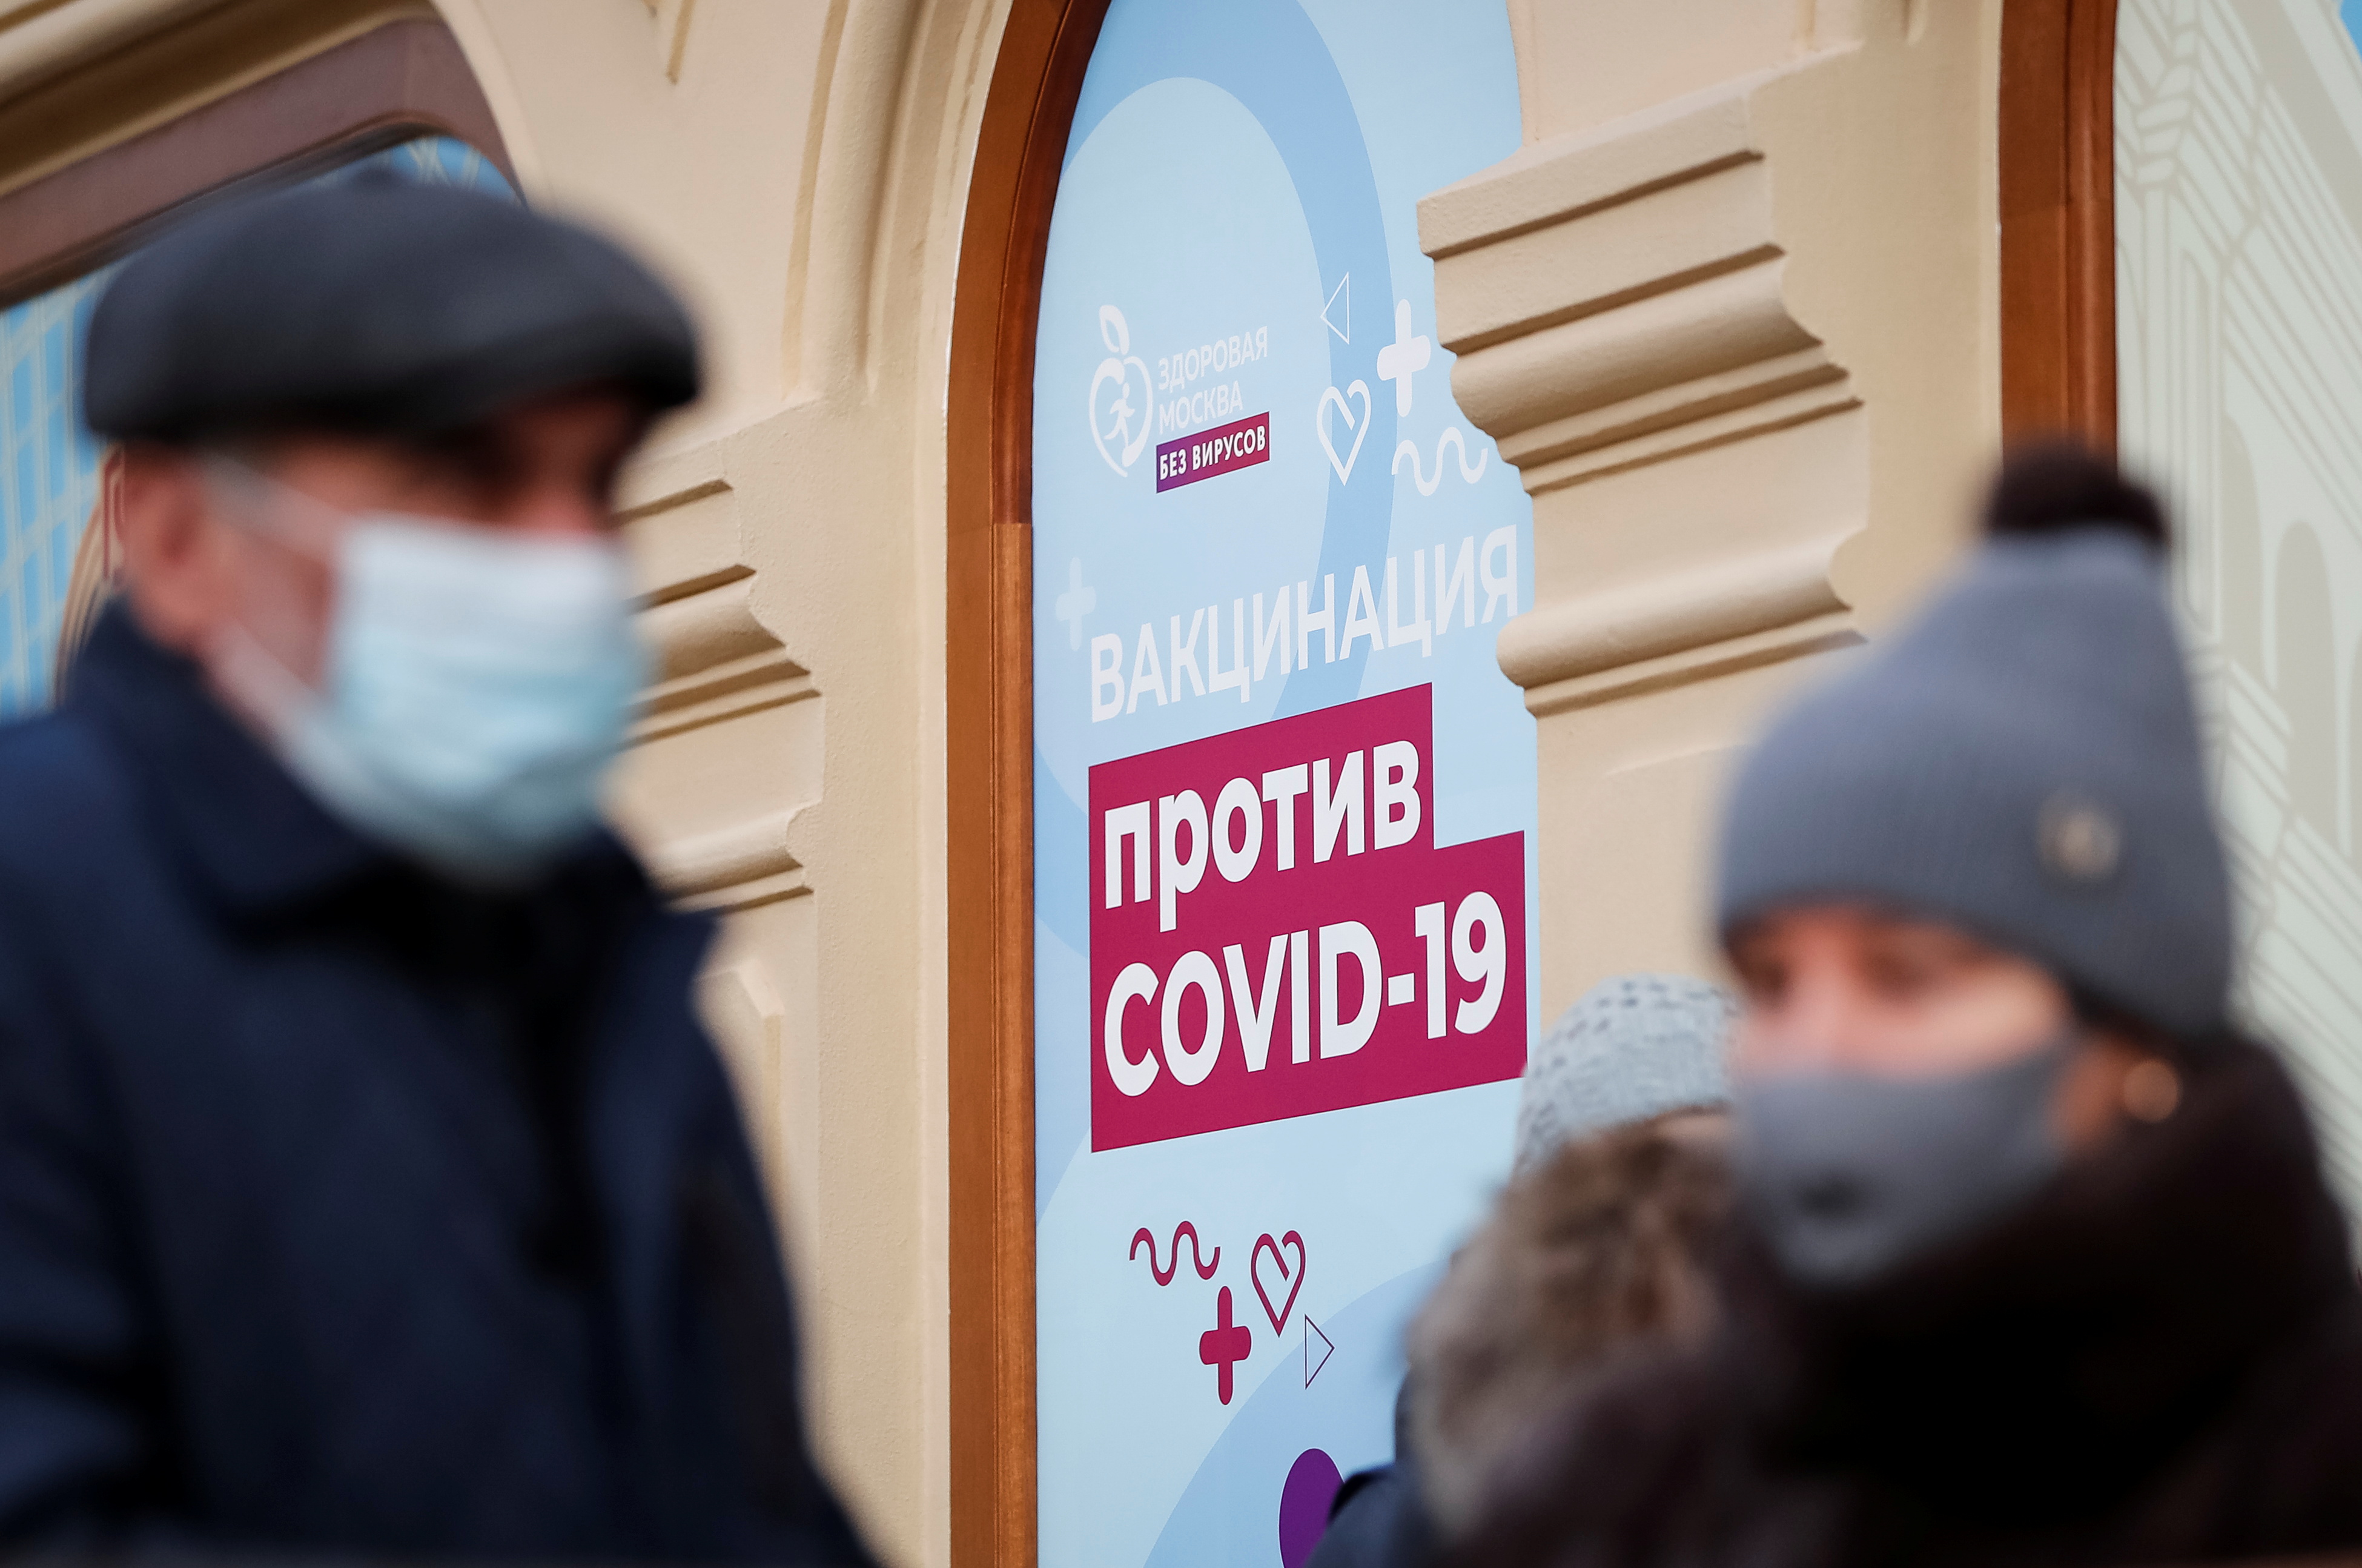 People are seen outside a vaccination centre in the State Department Store, GUM, amid the outbreak of the coronavirus disease (COVID-19), in central Moscow, Russia January 18, 2021 REUTERS/Shamil Zhumatov